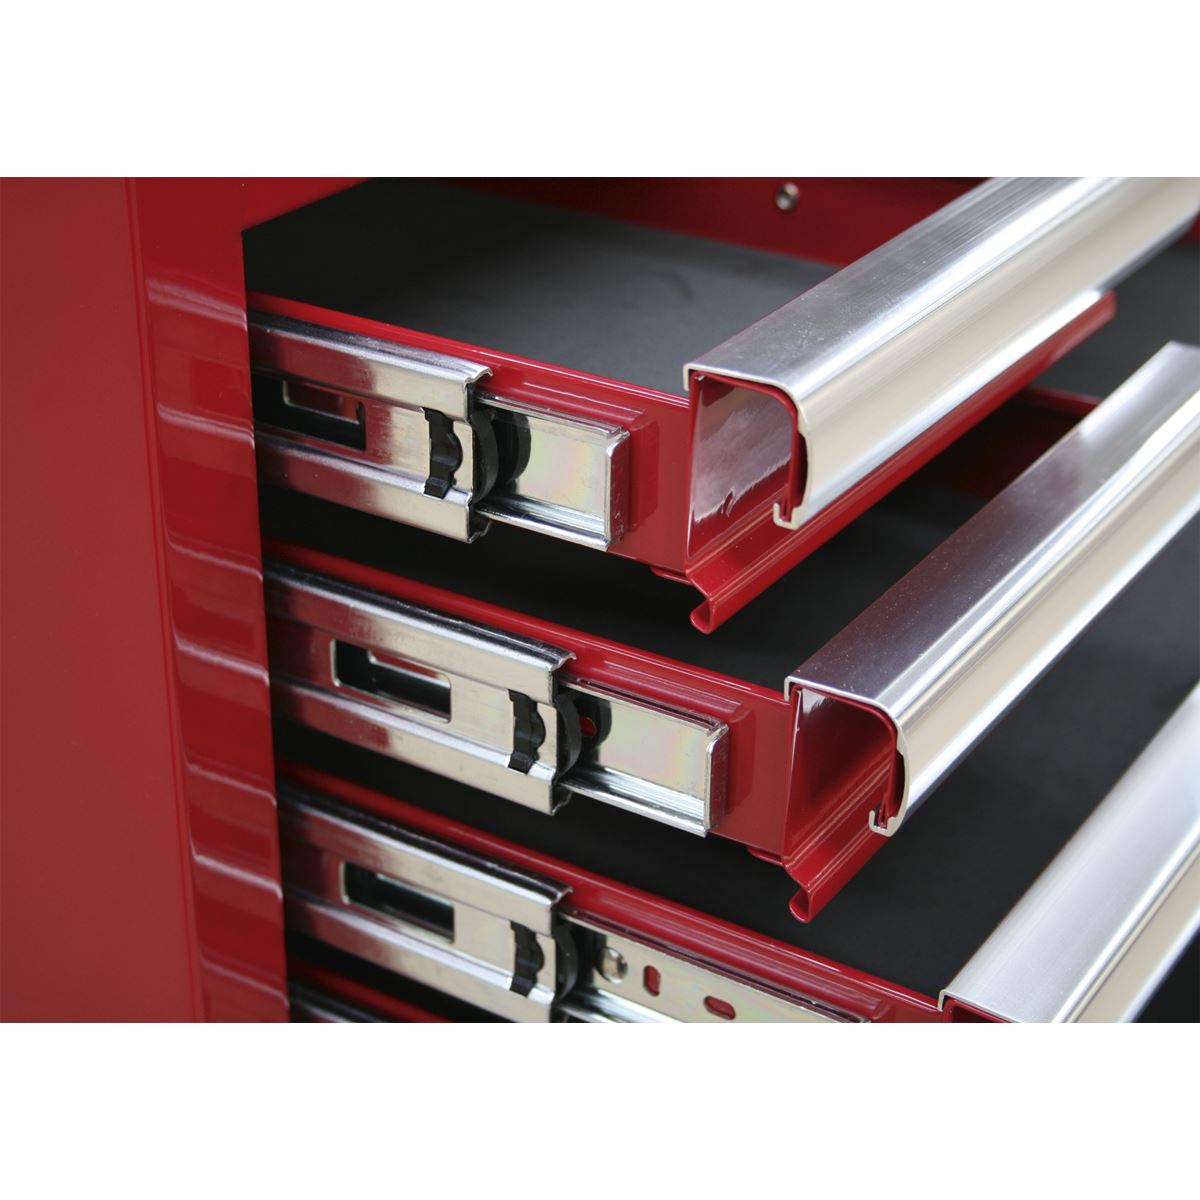 Sealey Superline Pro Tool Chest Combination 14 Drawer with Ball-Bearing Slides - Red & 1179pc Tool Kit